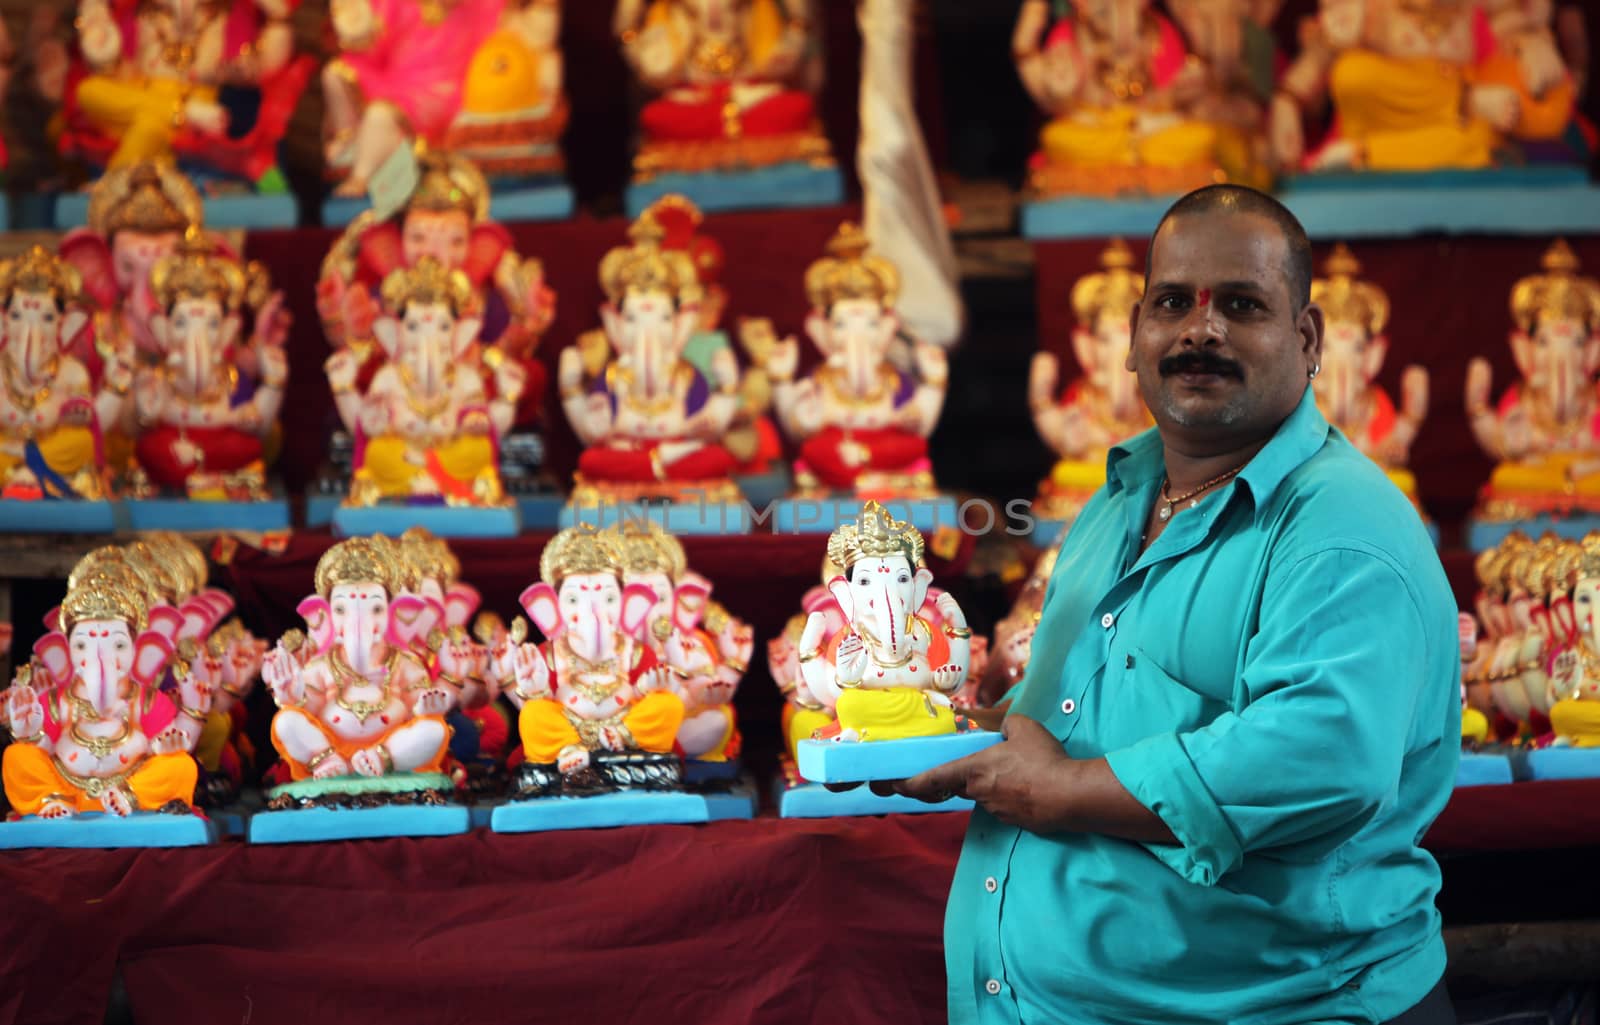 A man selling Lord Ganesh idols on the eve of Ganesh festival in India. The festival involves thousands of visitors from all over the world every year, in the main celebration city - Pune. 